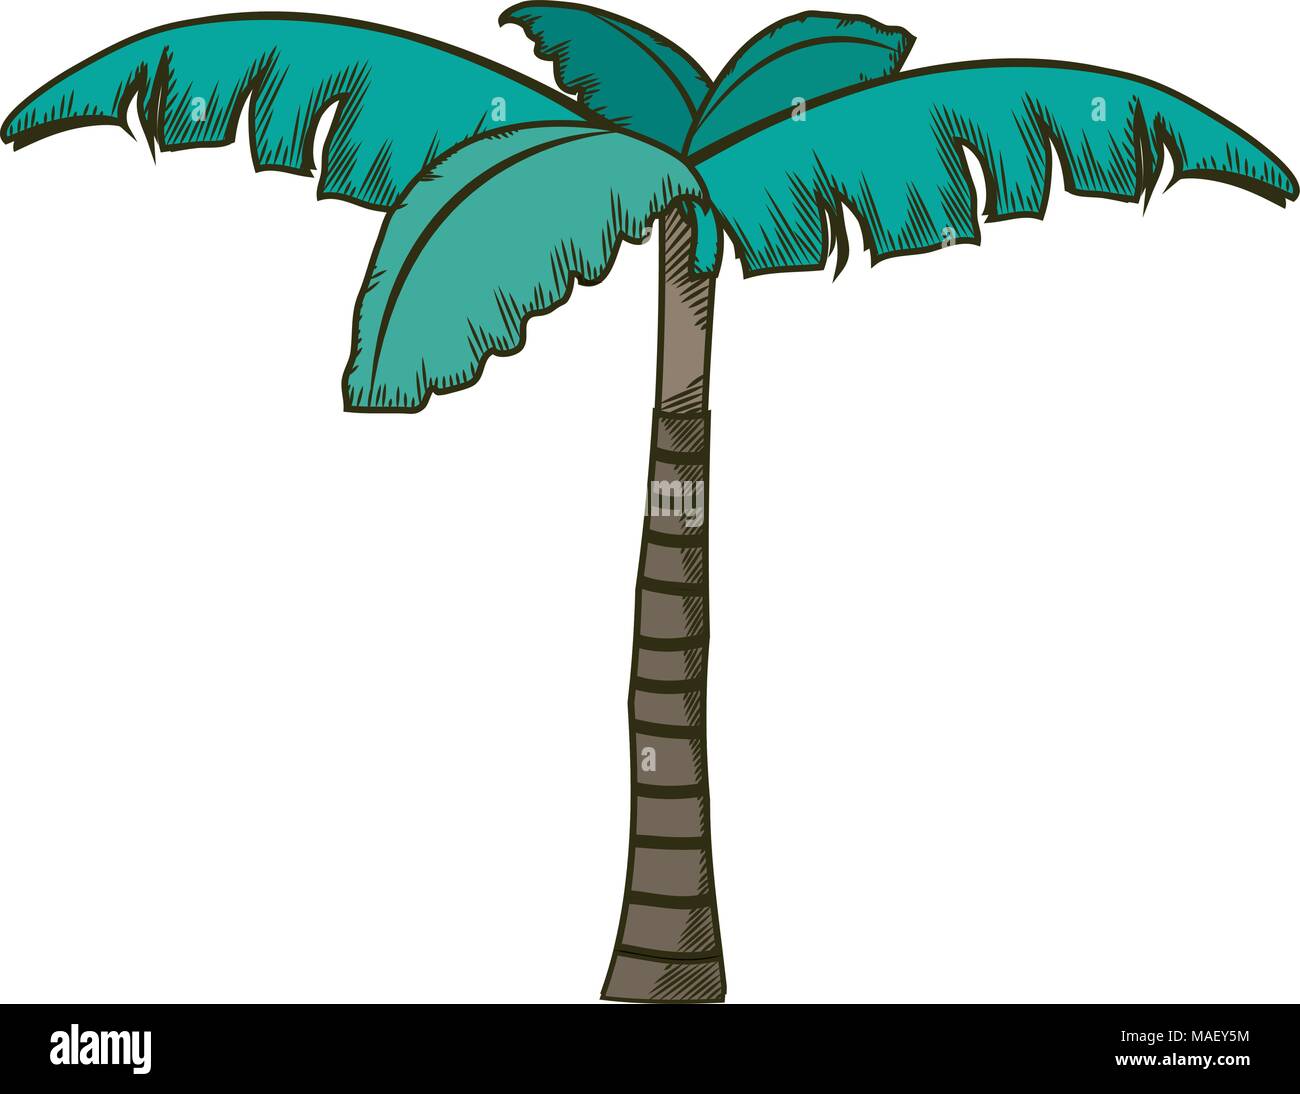 tropical palm tree with natural design vector illustration Stock Vector